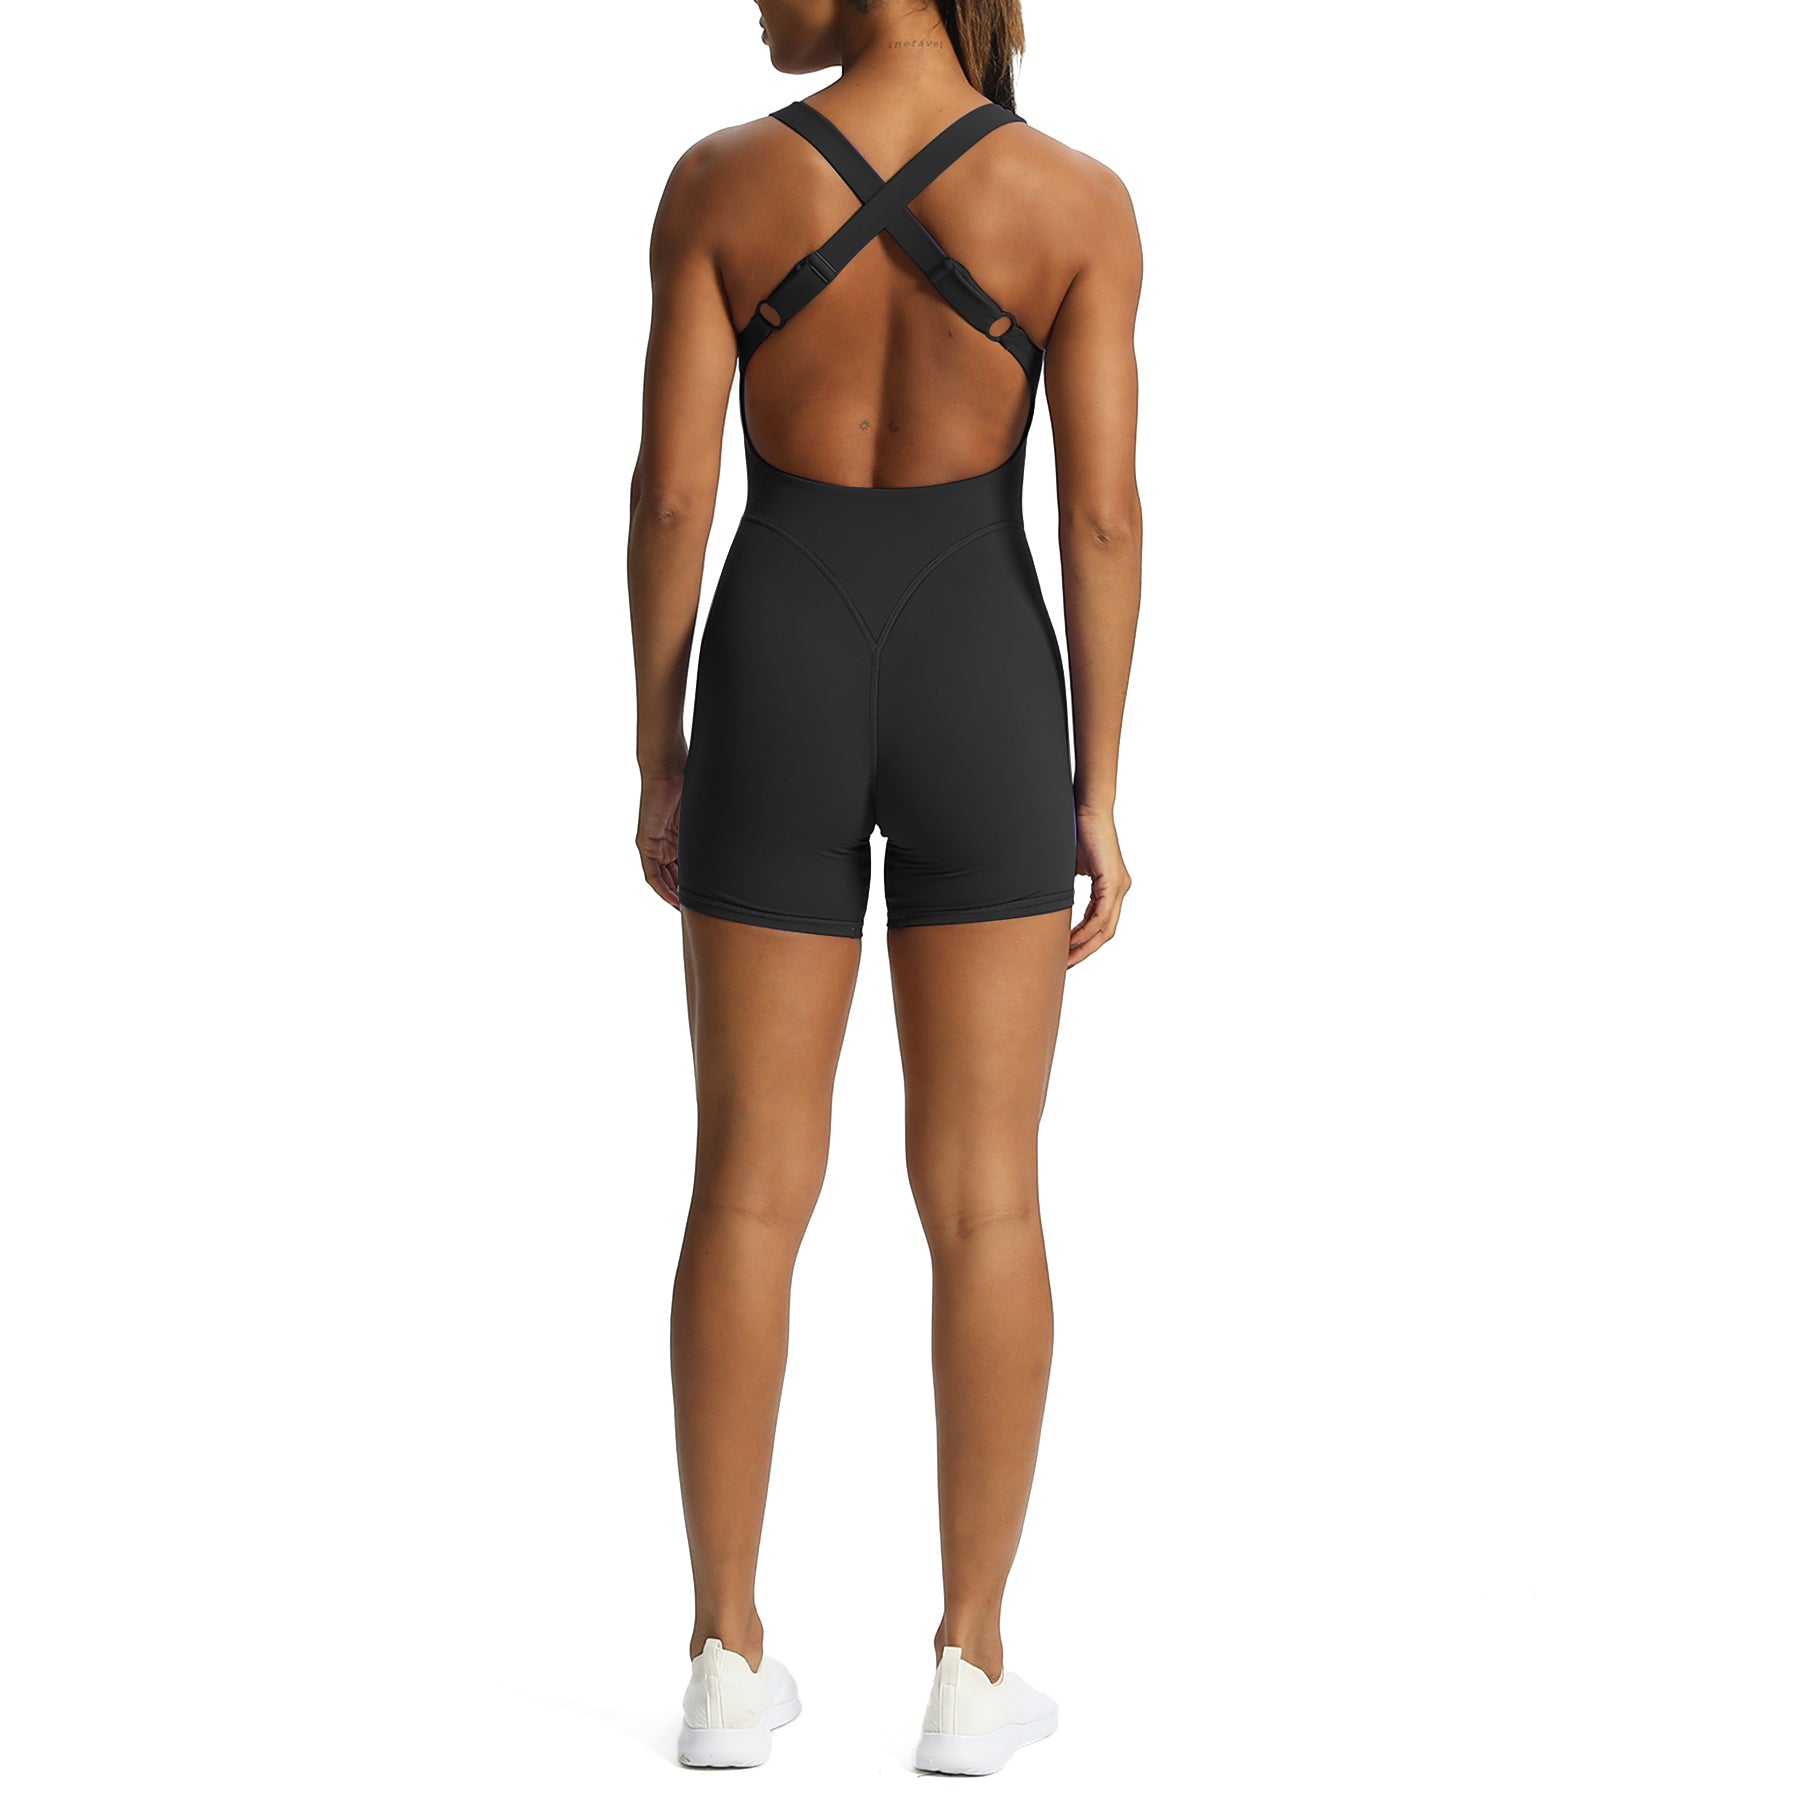 Aoxjox "Lexi Lined" Adjustable Shorts Bodysuit